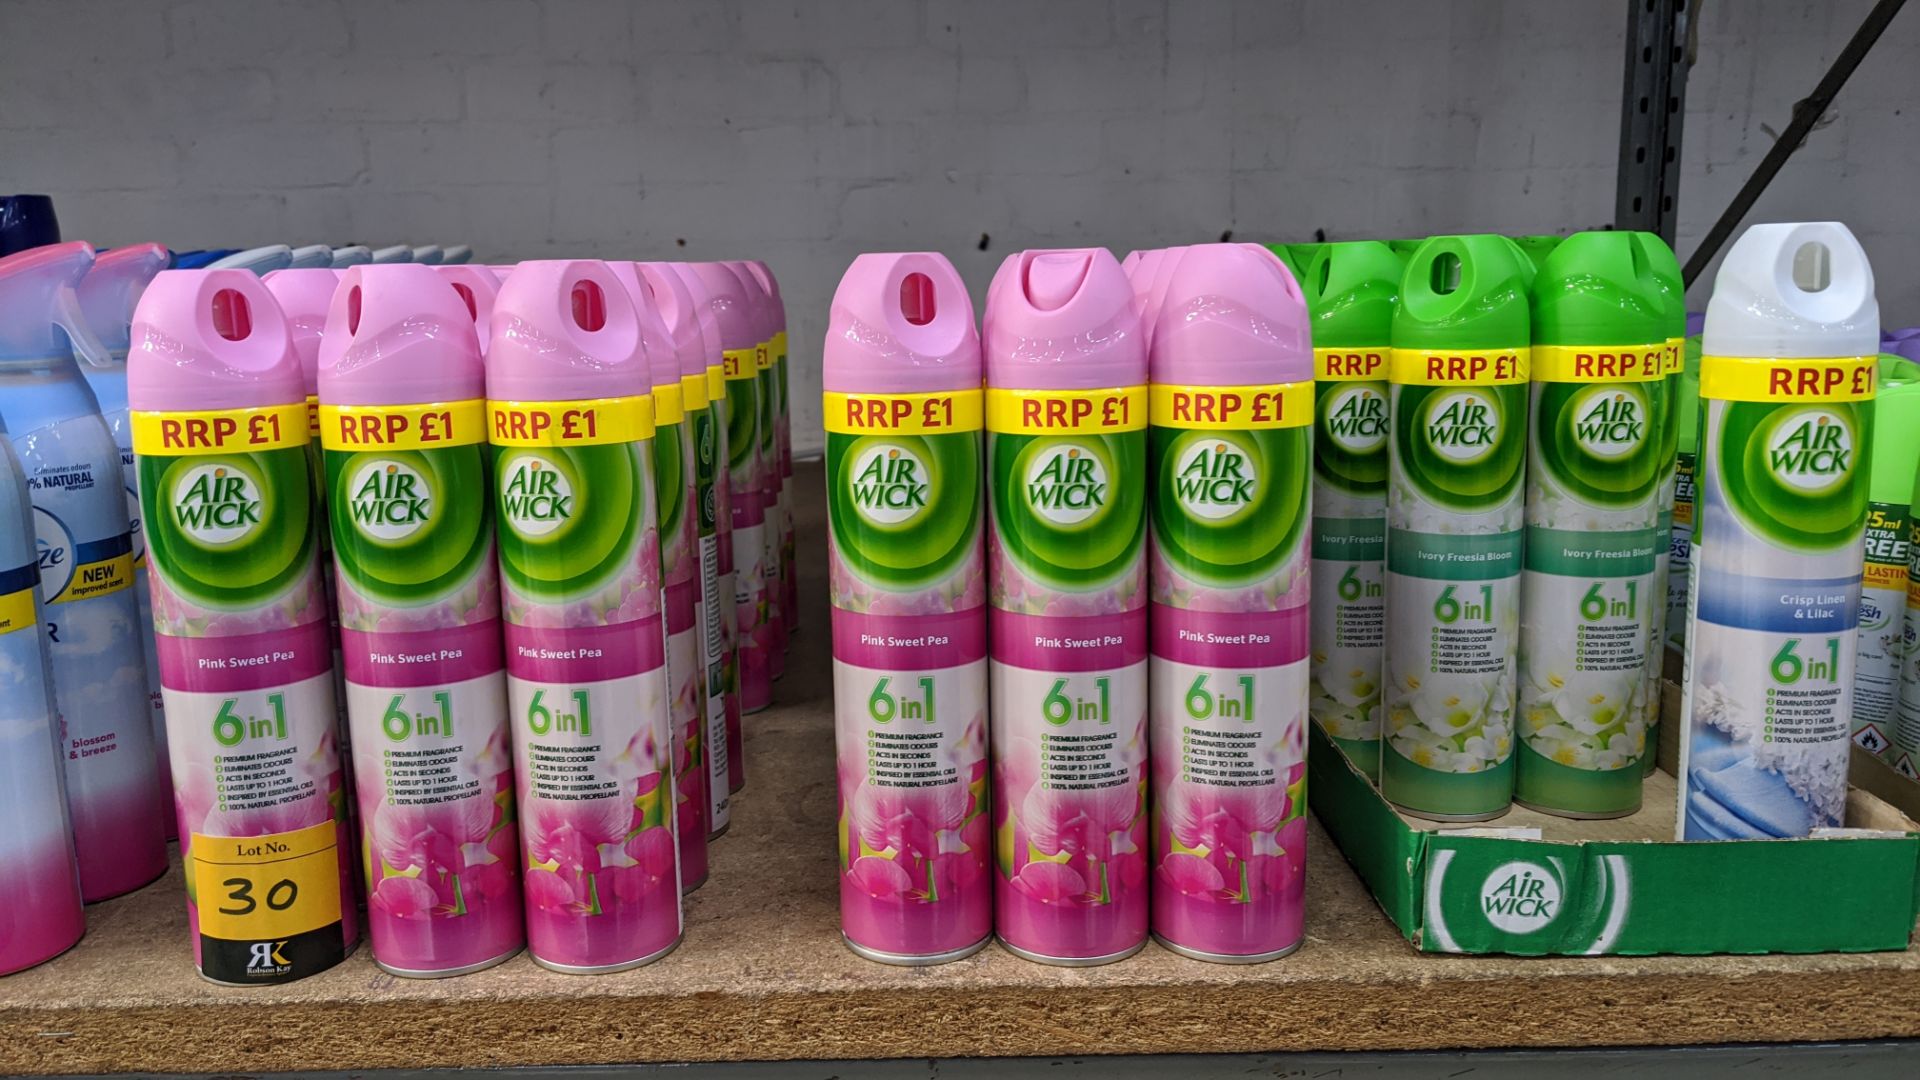 54 off 240ml spray tins of Air Wick 6-in-1 air freshener in assorted scents. IMPORTANT – DO NOT